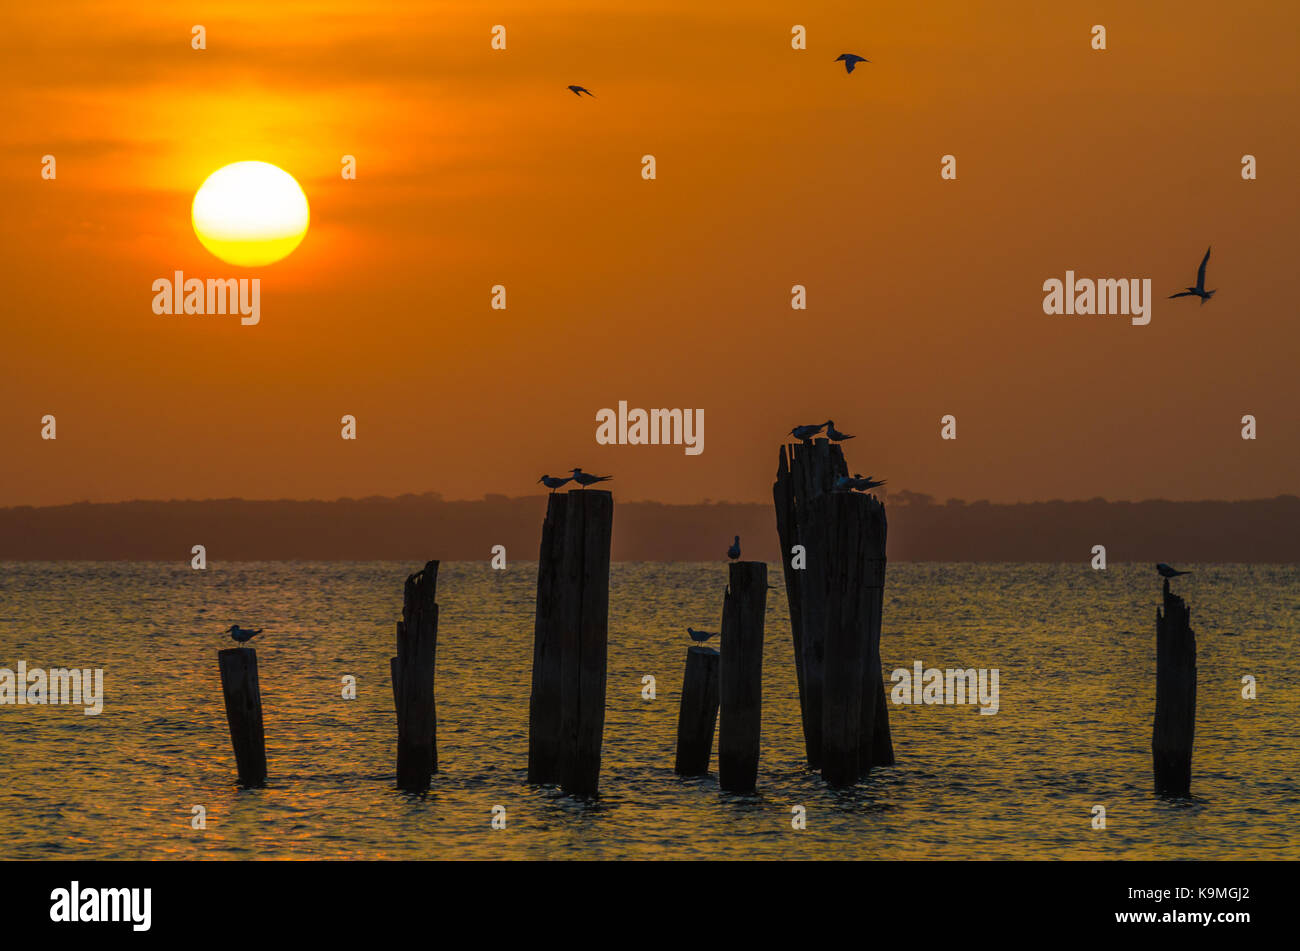 Amazing golden sunset over ocean with wooden poles and flying birds on Bubaque, Bijagos archipelago, Guinea Bissau, West Africa. Stock Photo